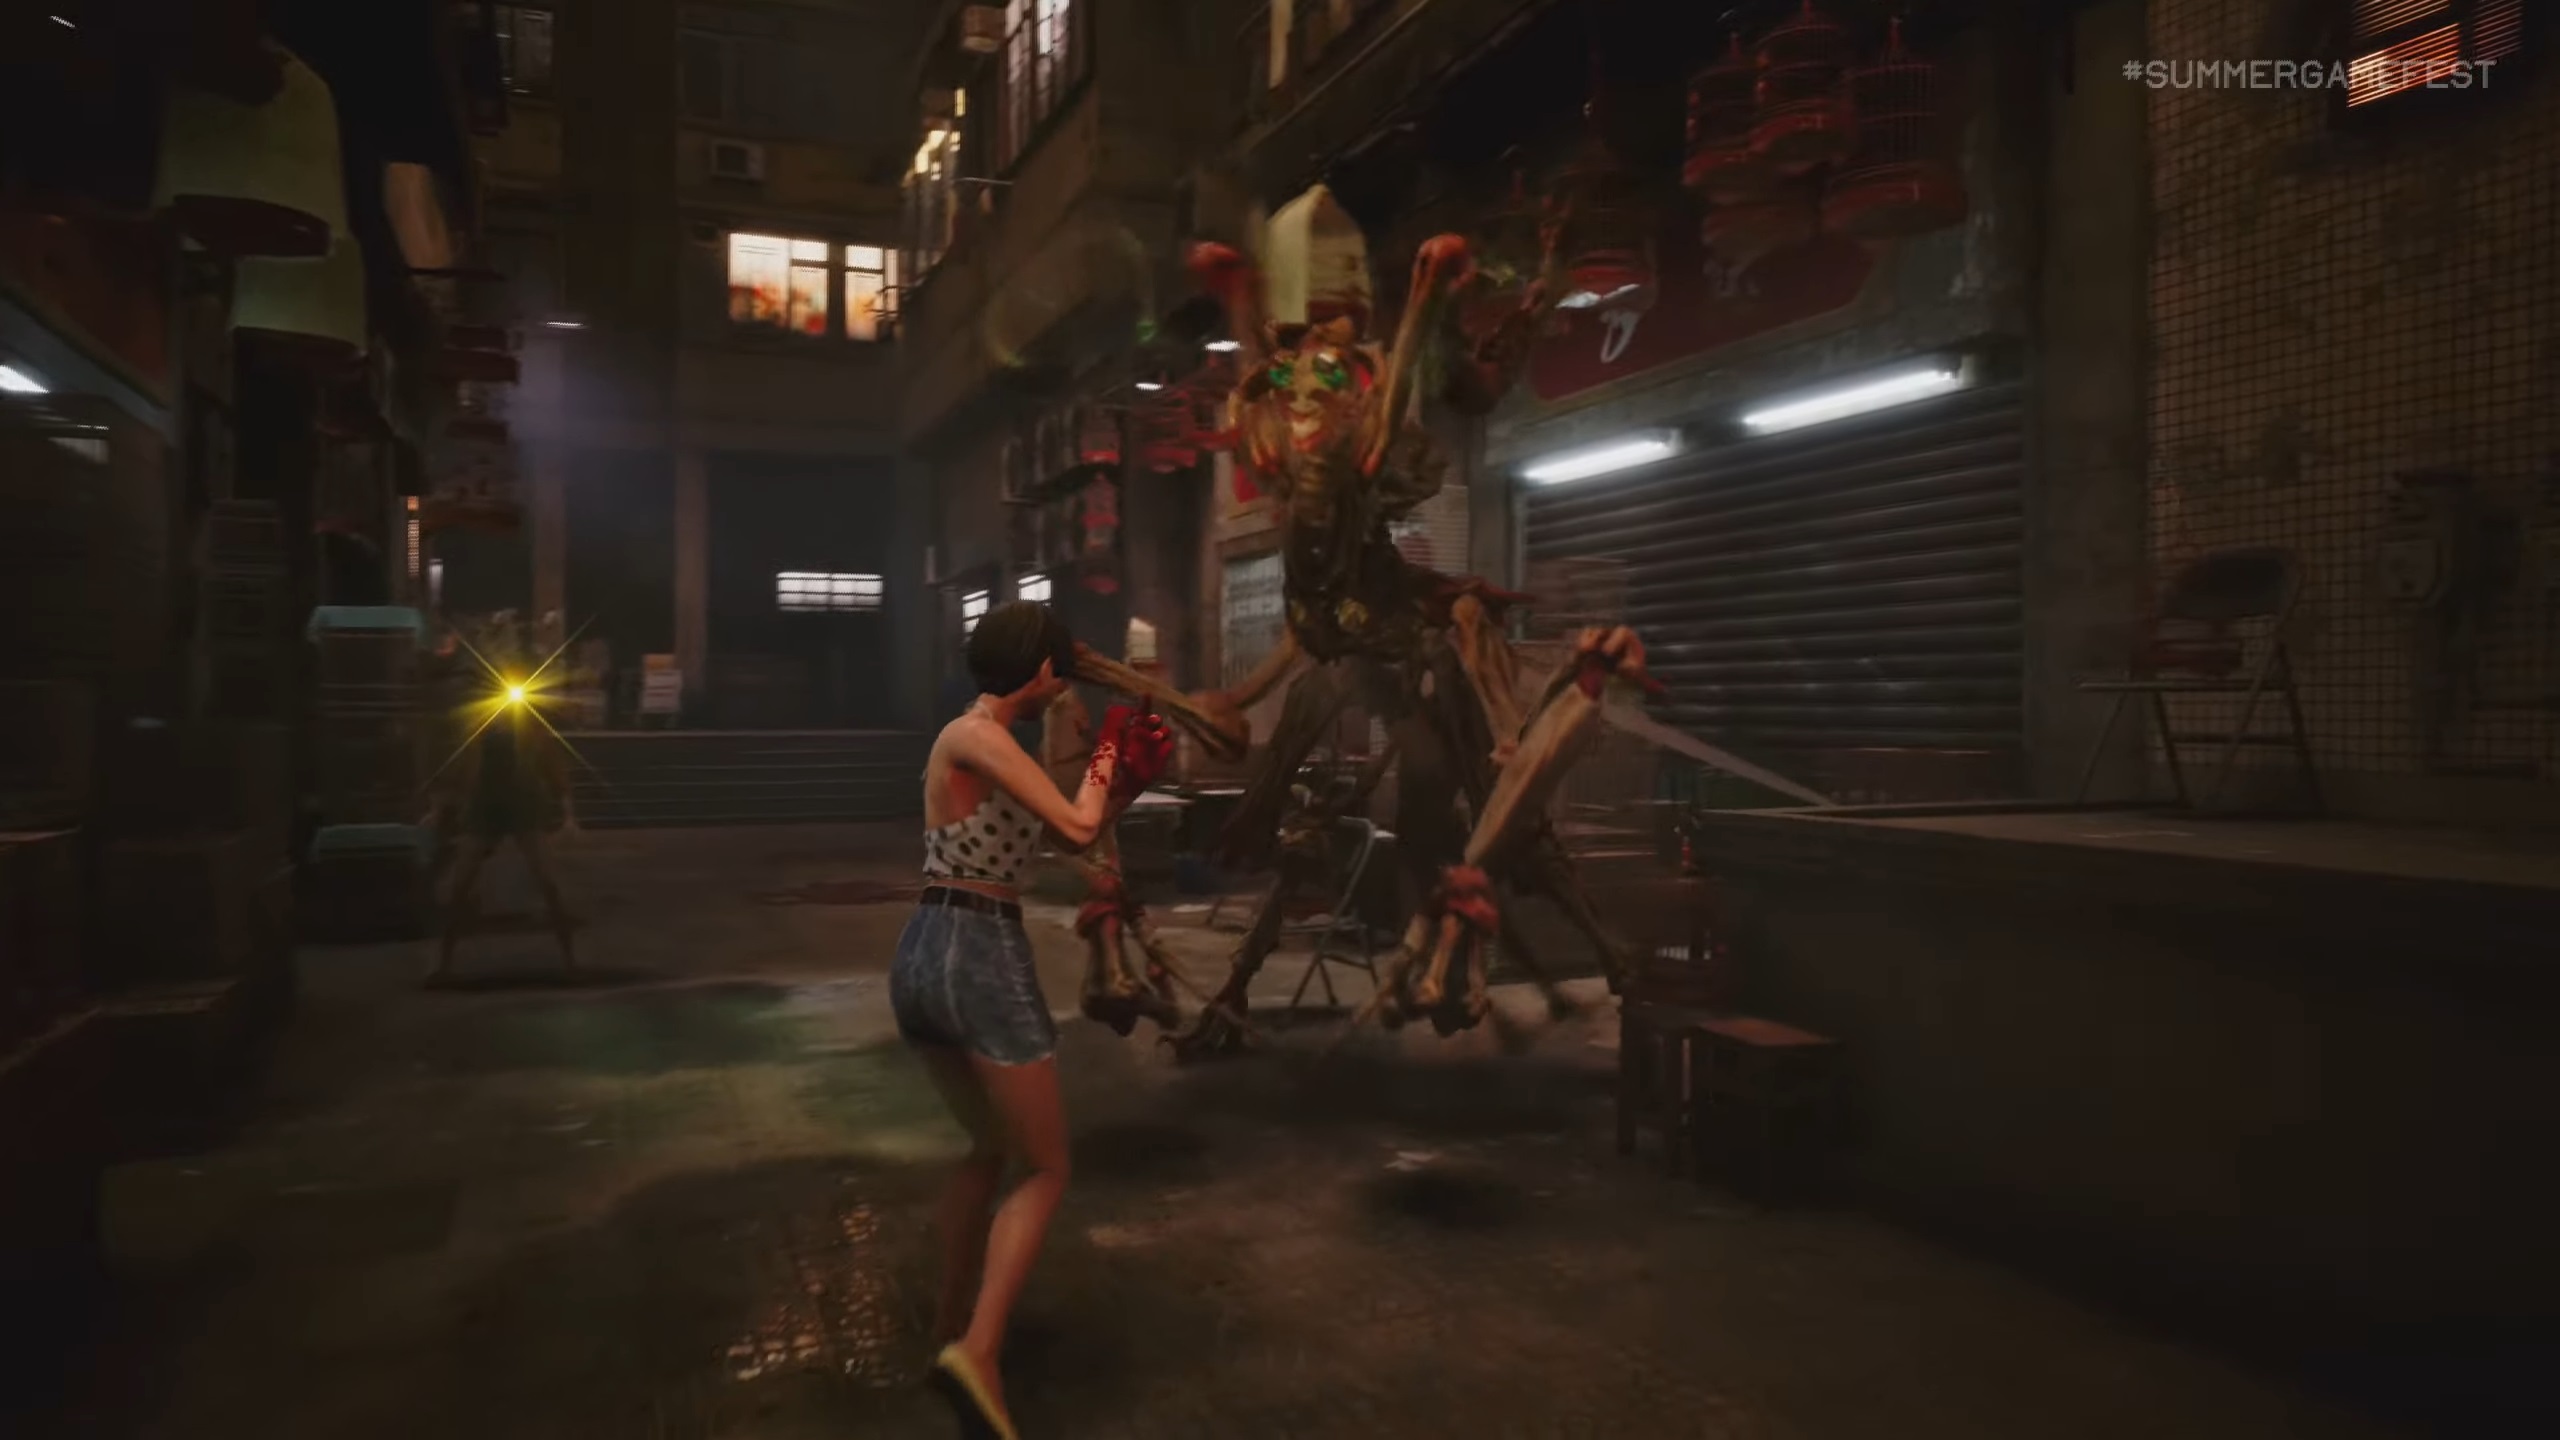 Slitterhead gameplay reveal showing grungy Tokyo streets, people with red eyes, and strange monsters bursting out of people